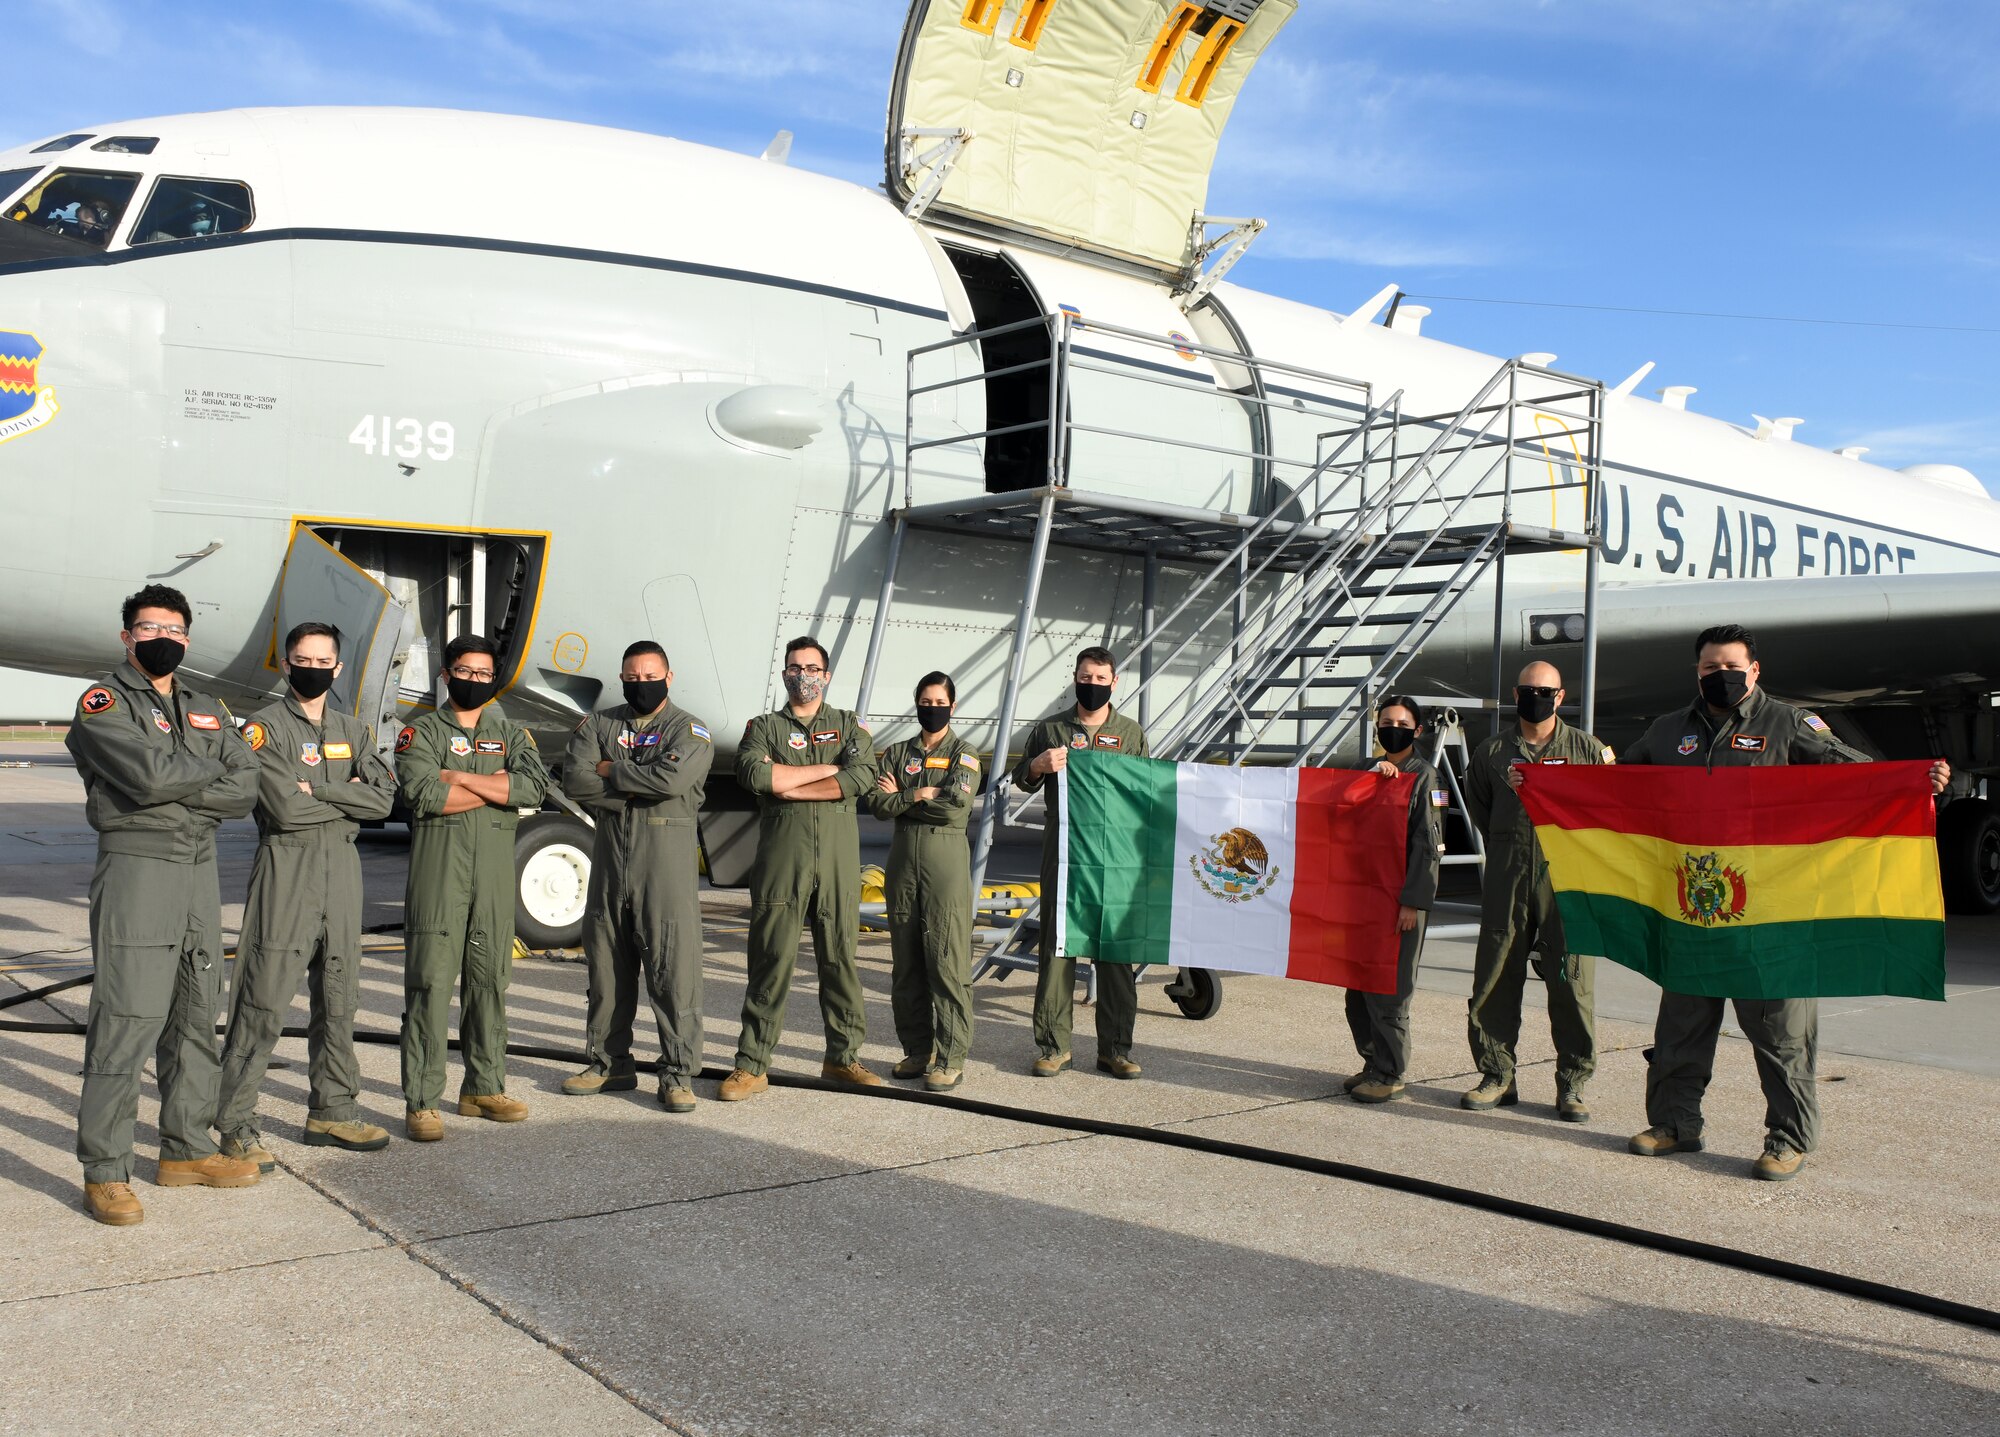 Air Force members stand in front of aircraft